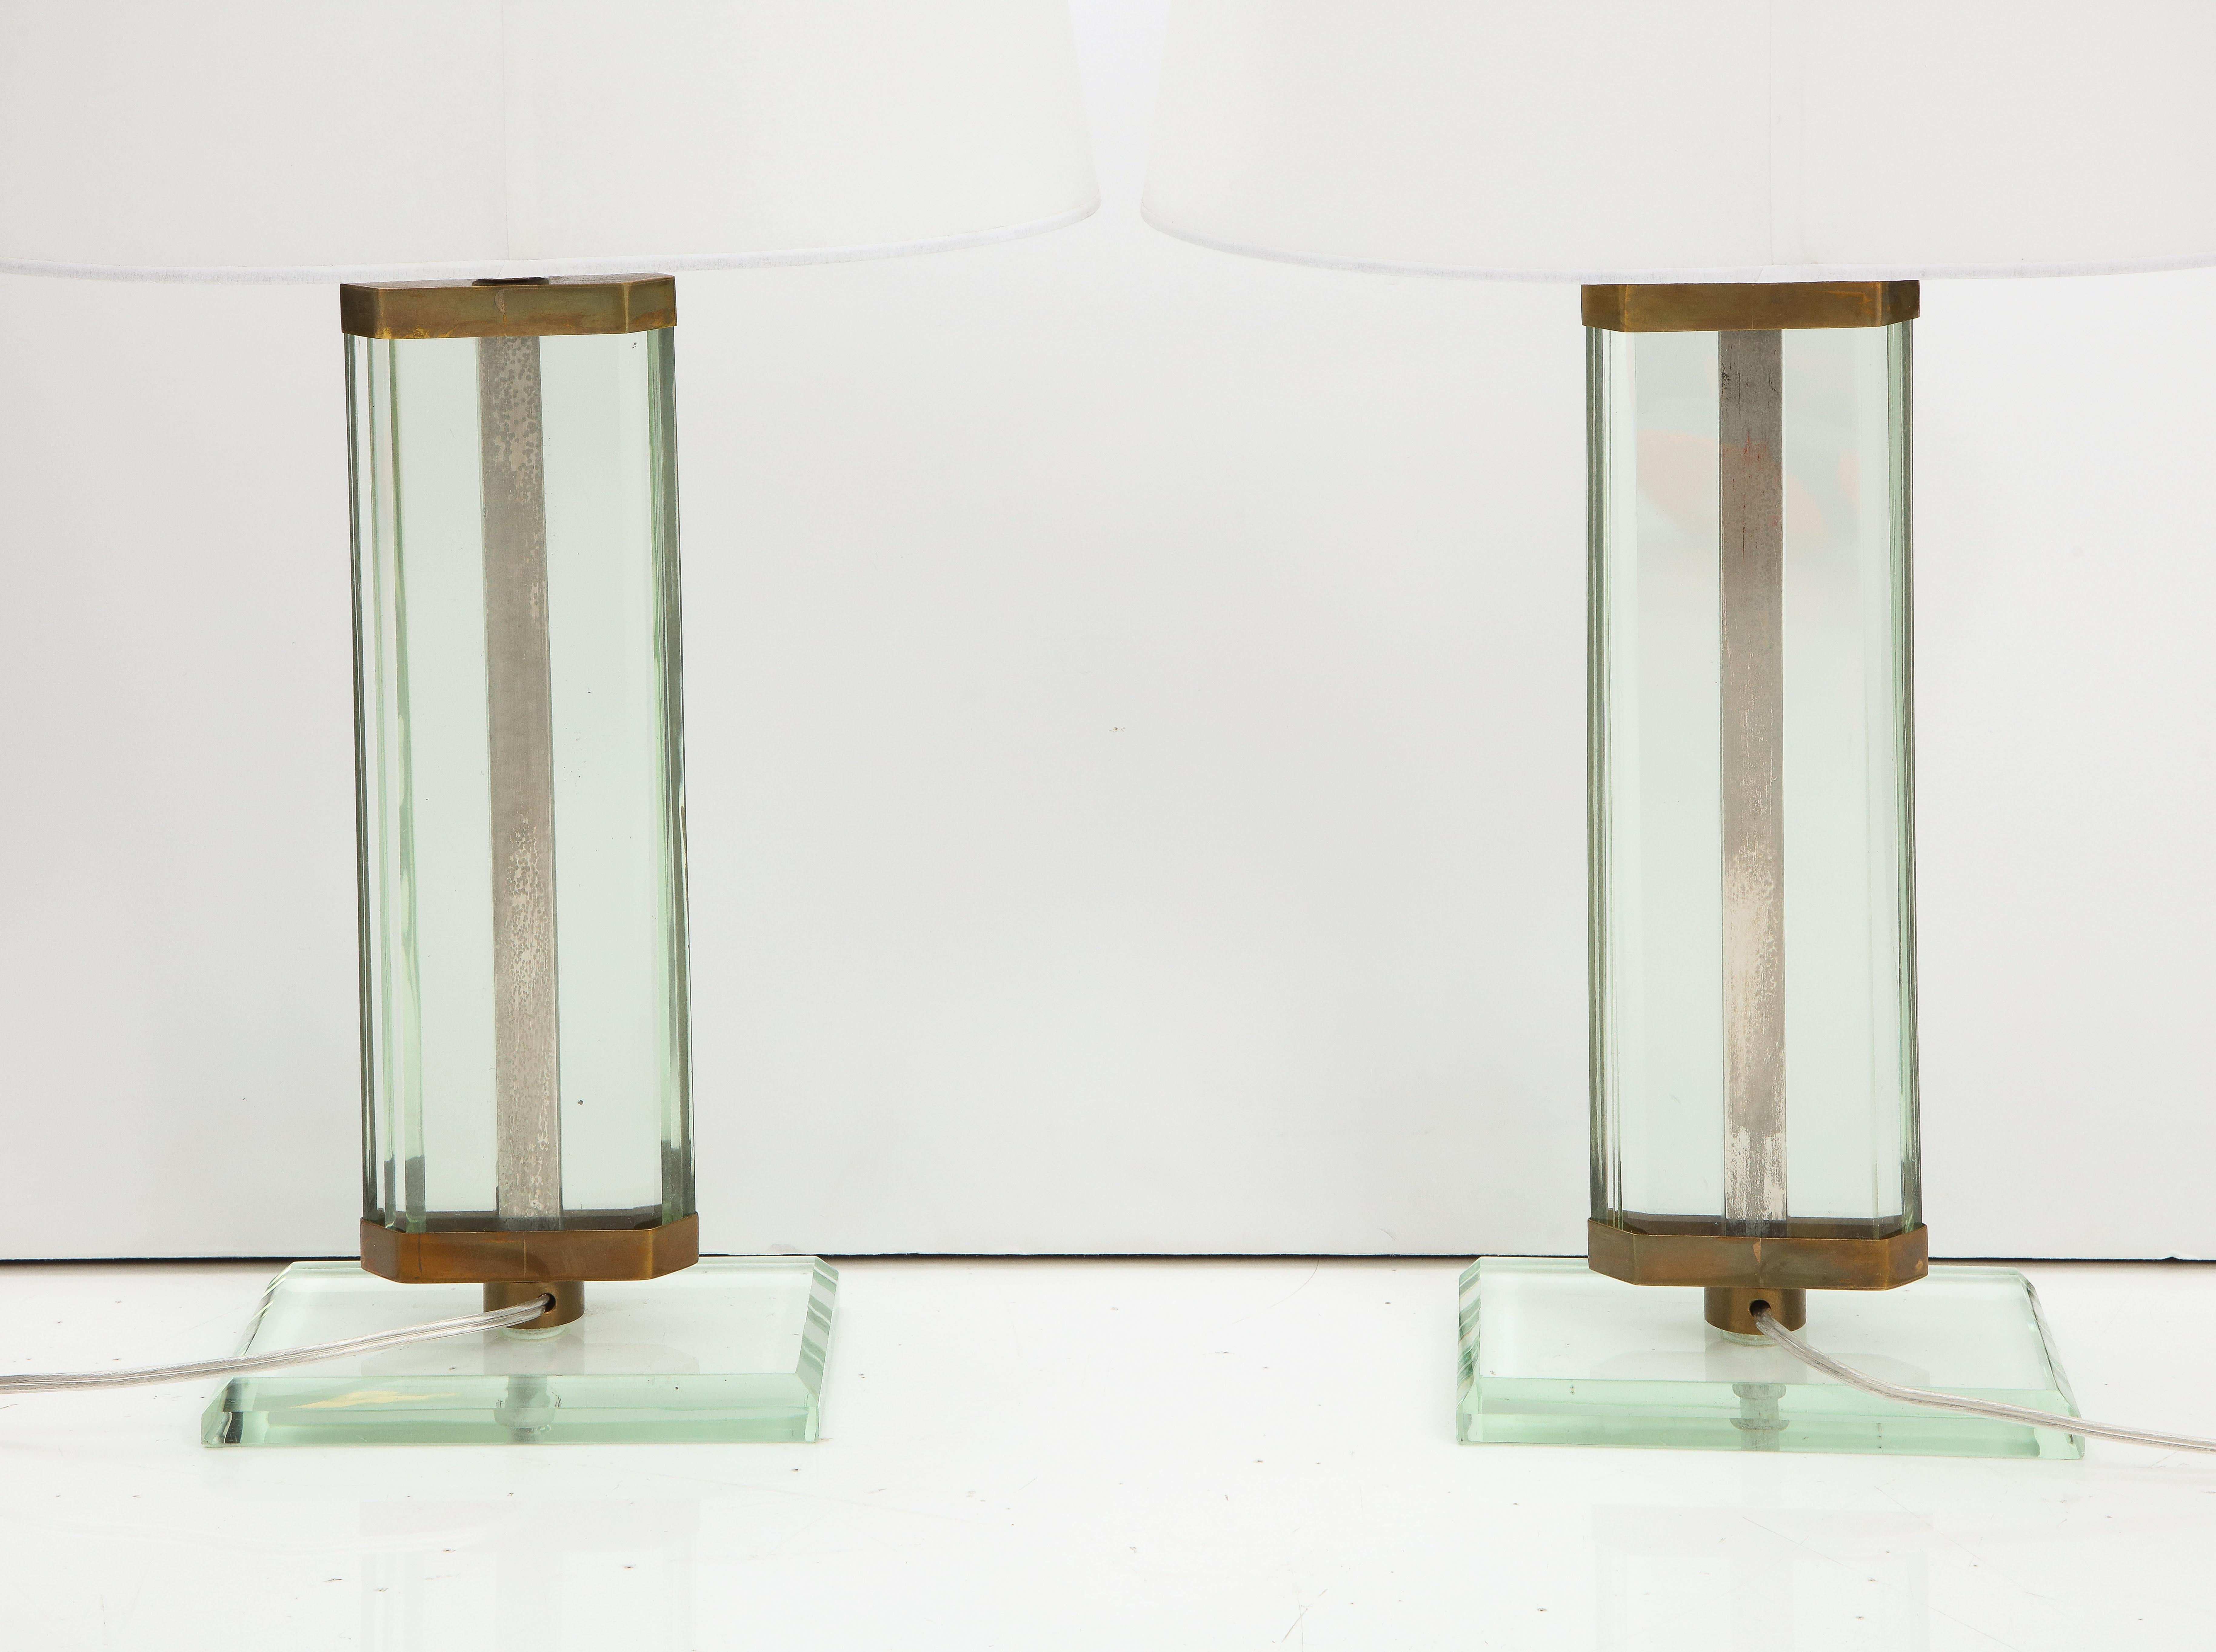 Pietro Chiesa Pair of Fontana Arte Glass & Brass Lamps, Italy, 1940's For Sale 3